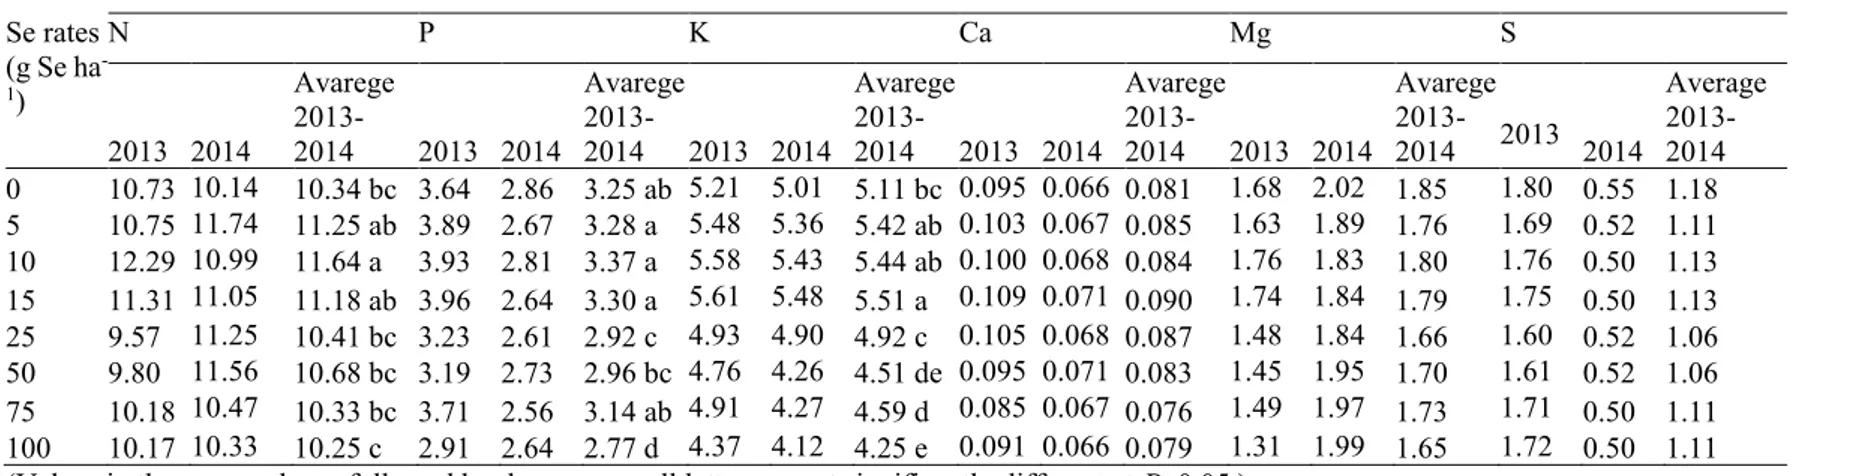 Table 6. Effect of Se applications on Fe, Cu, Mn, Zn, B and Mo contents in maize grain